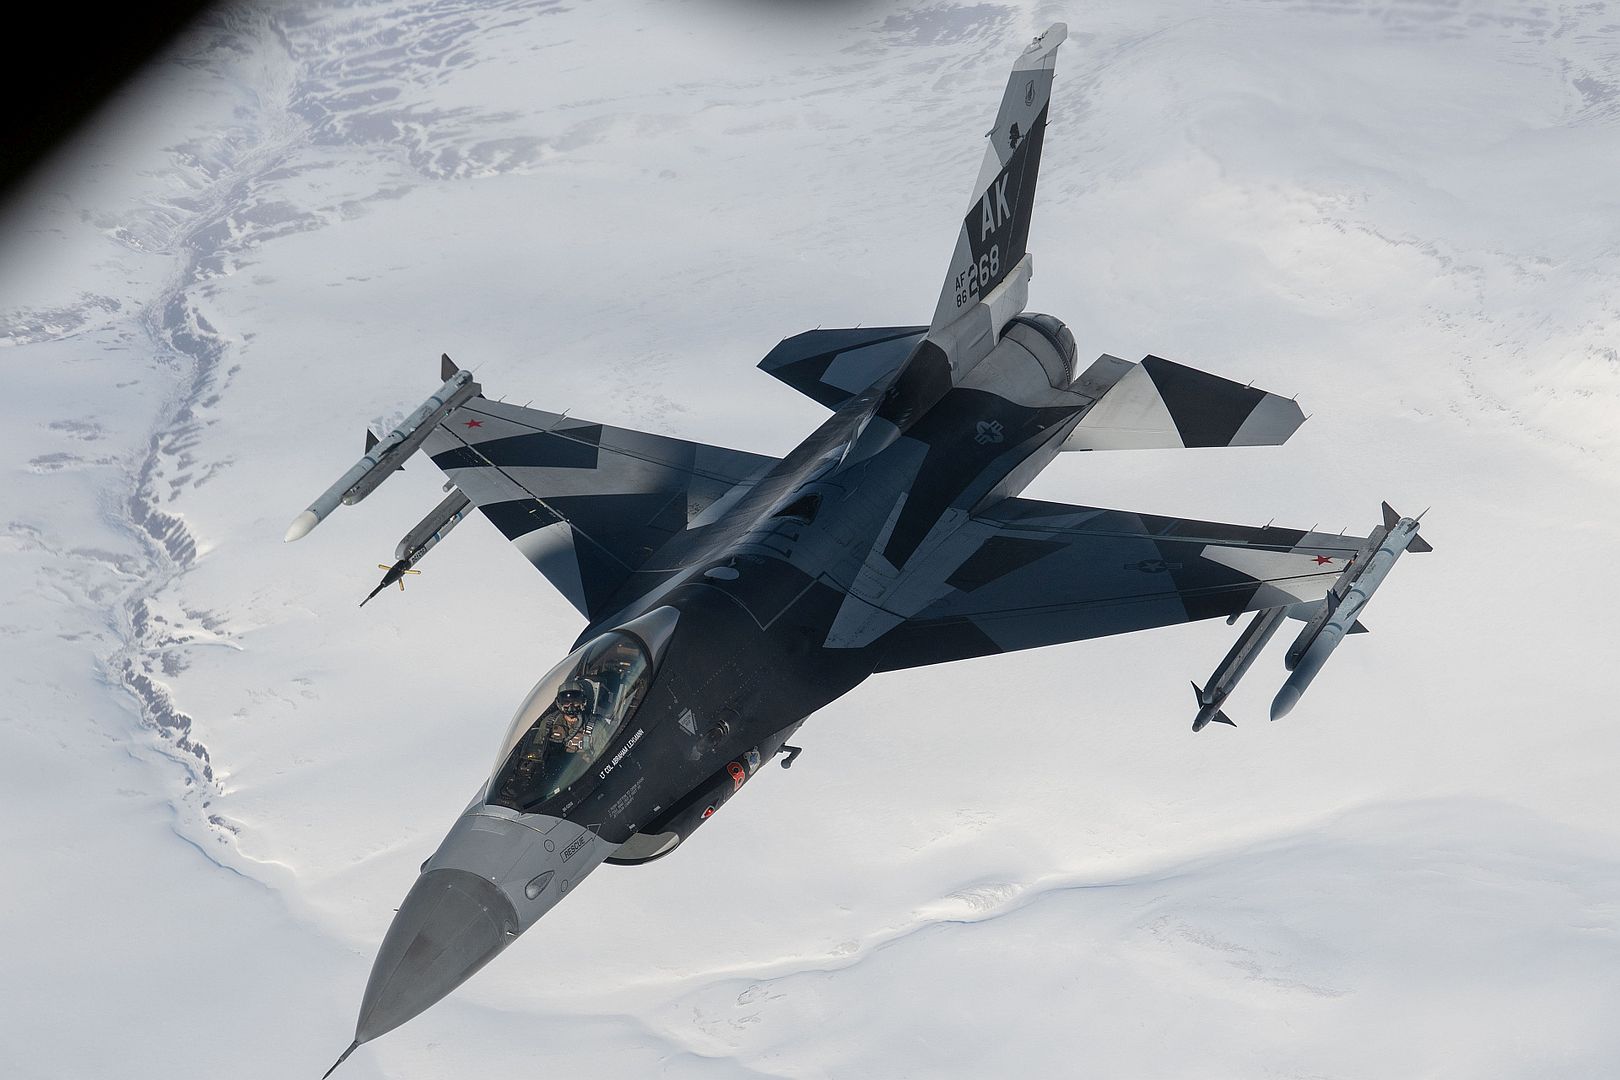 16 Fighting Falcon Assigned To The 18th Aggressor Squadron Eielson Air Force Base Alaska